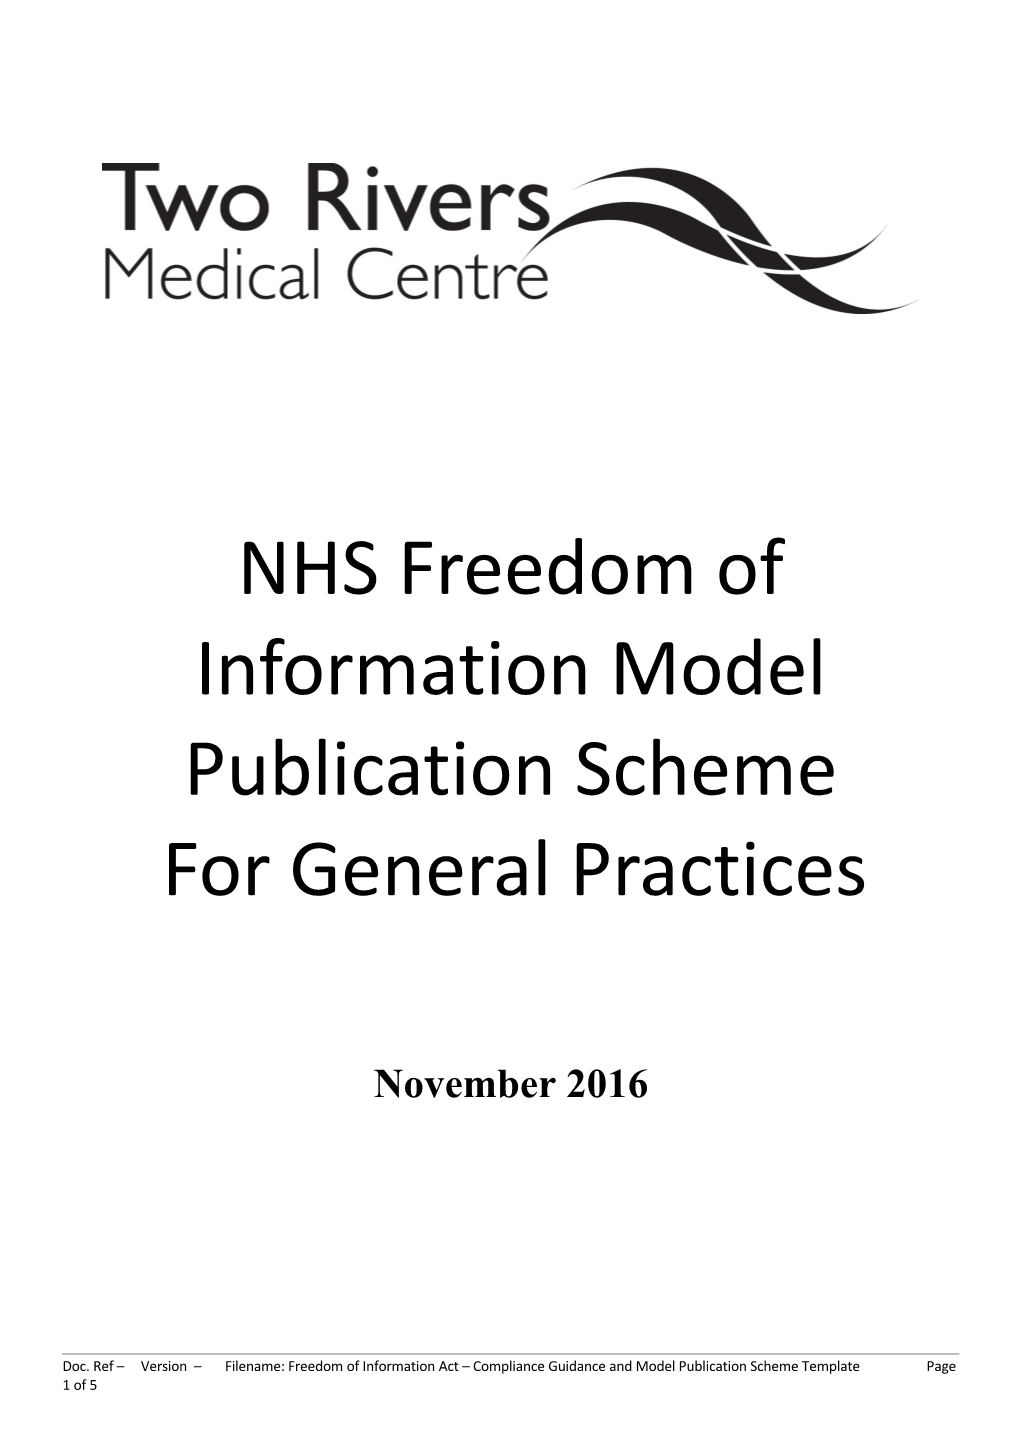 Freedom of Information Act Compliance Guidance and Model Publication Scheme Pre-Formatted